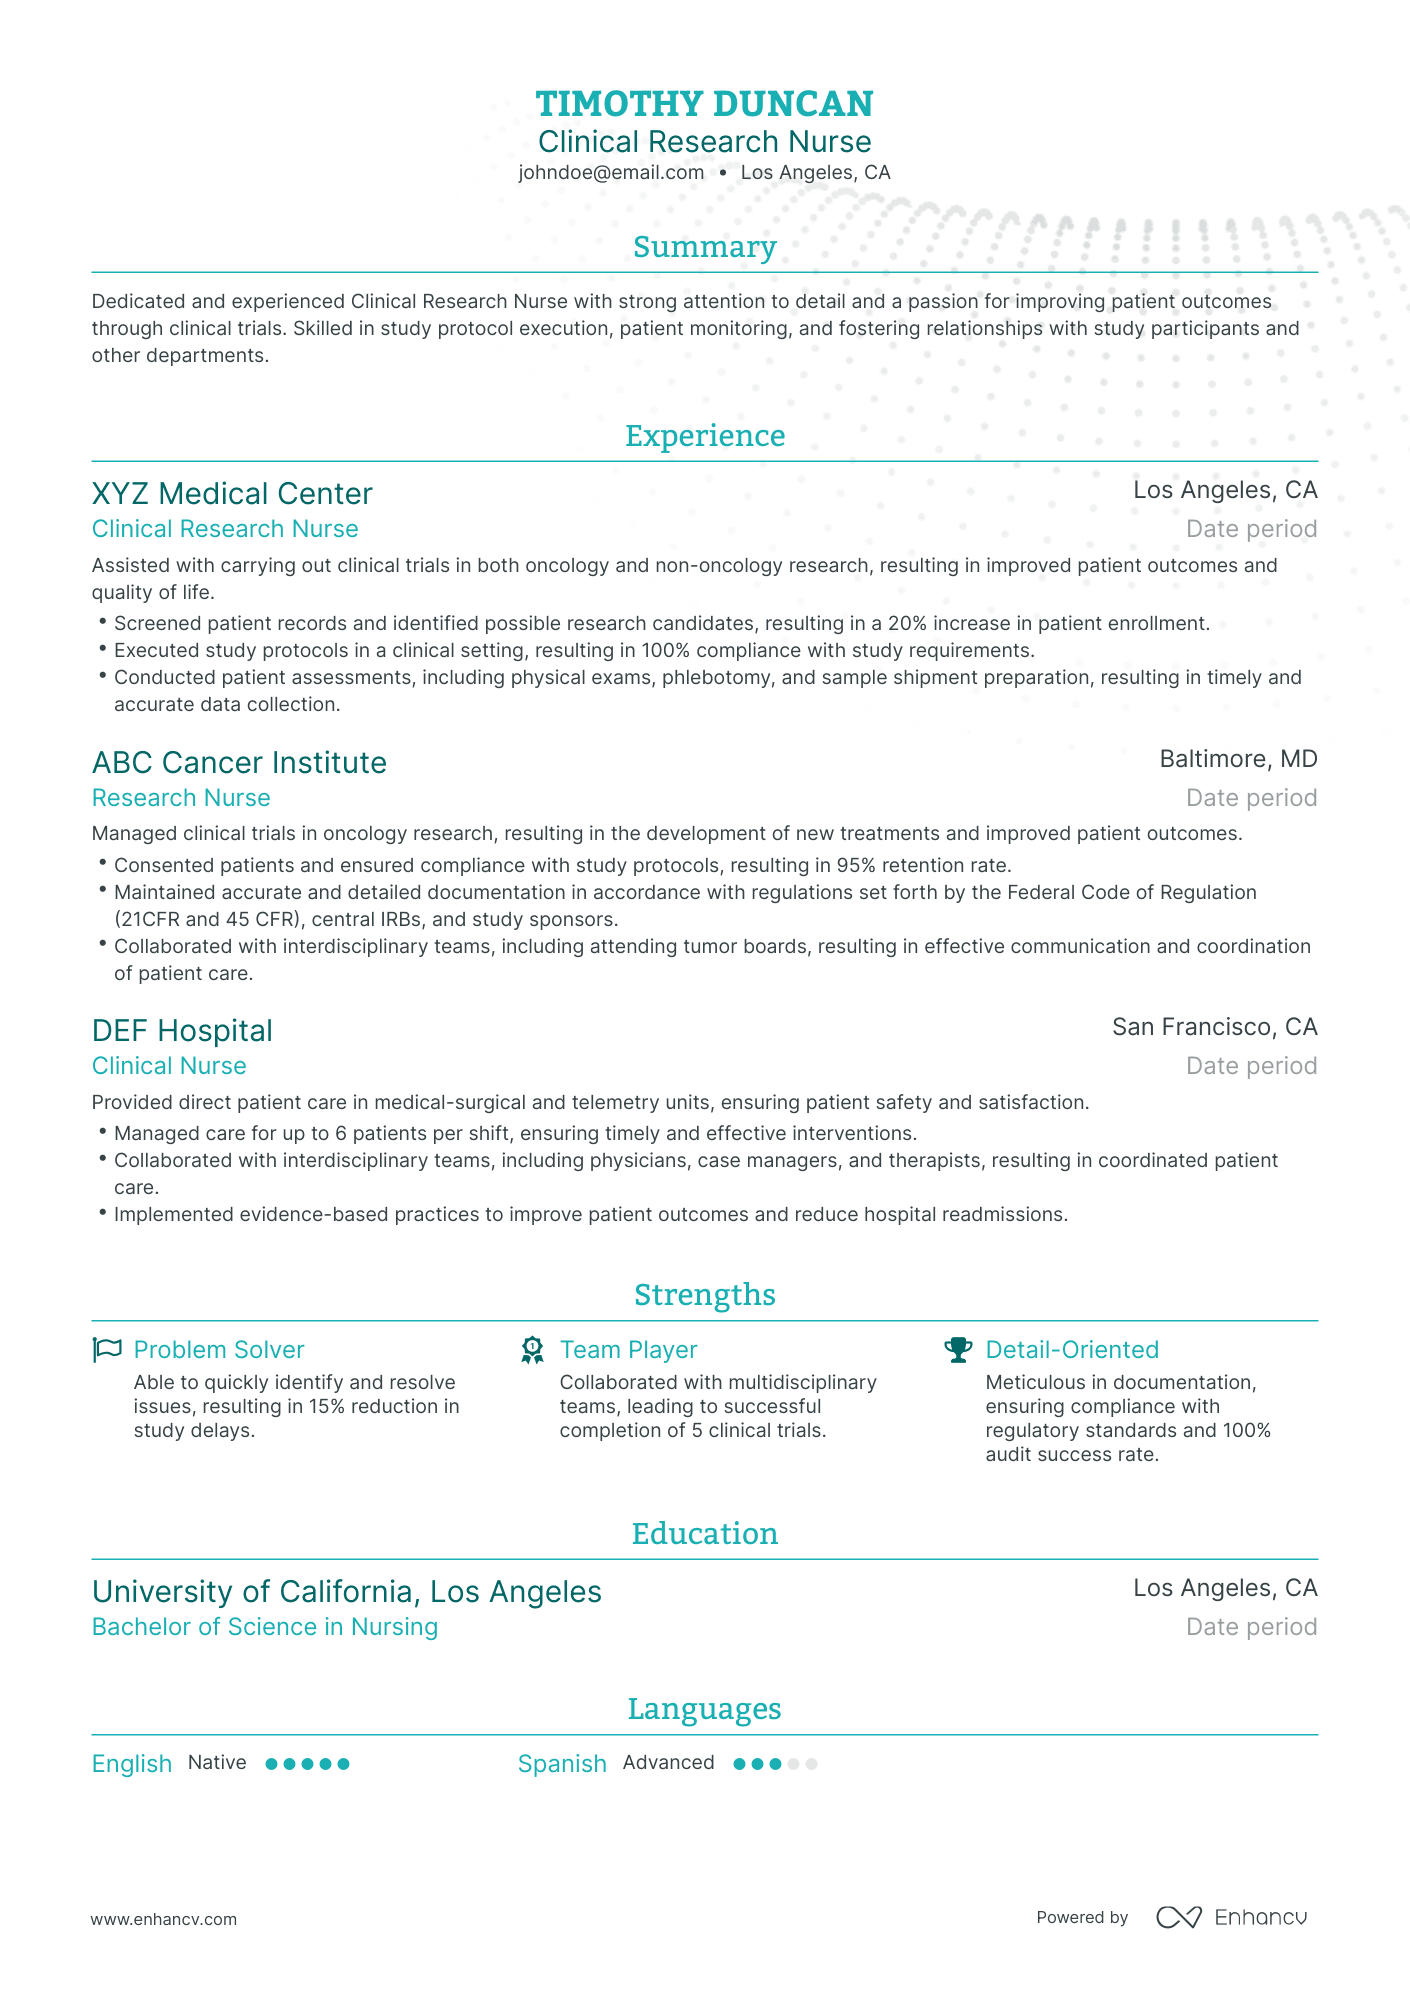 Traditional Clinical Research Nurse Resume Template